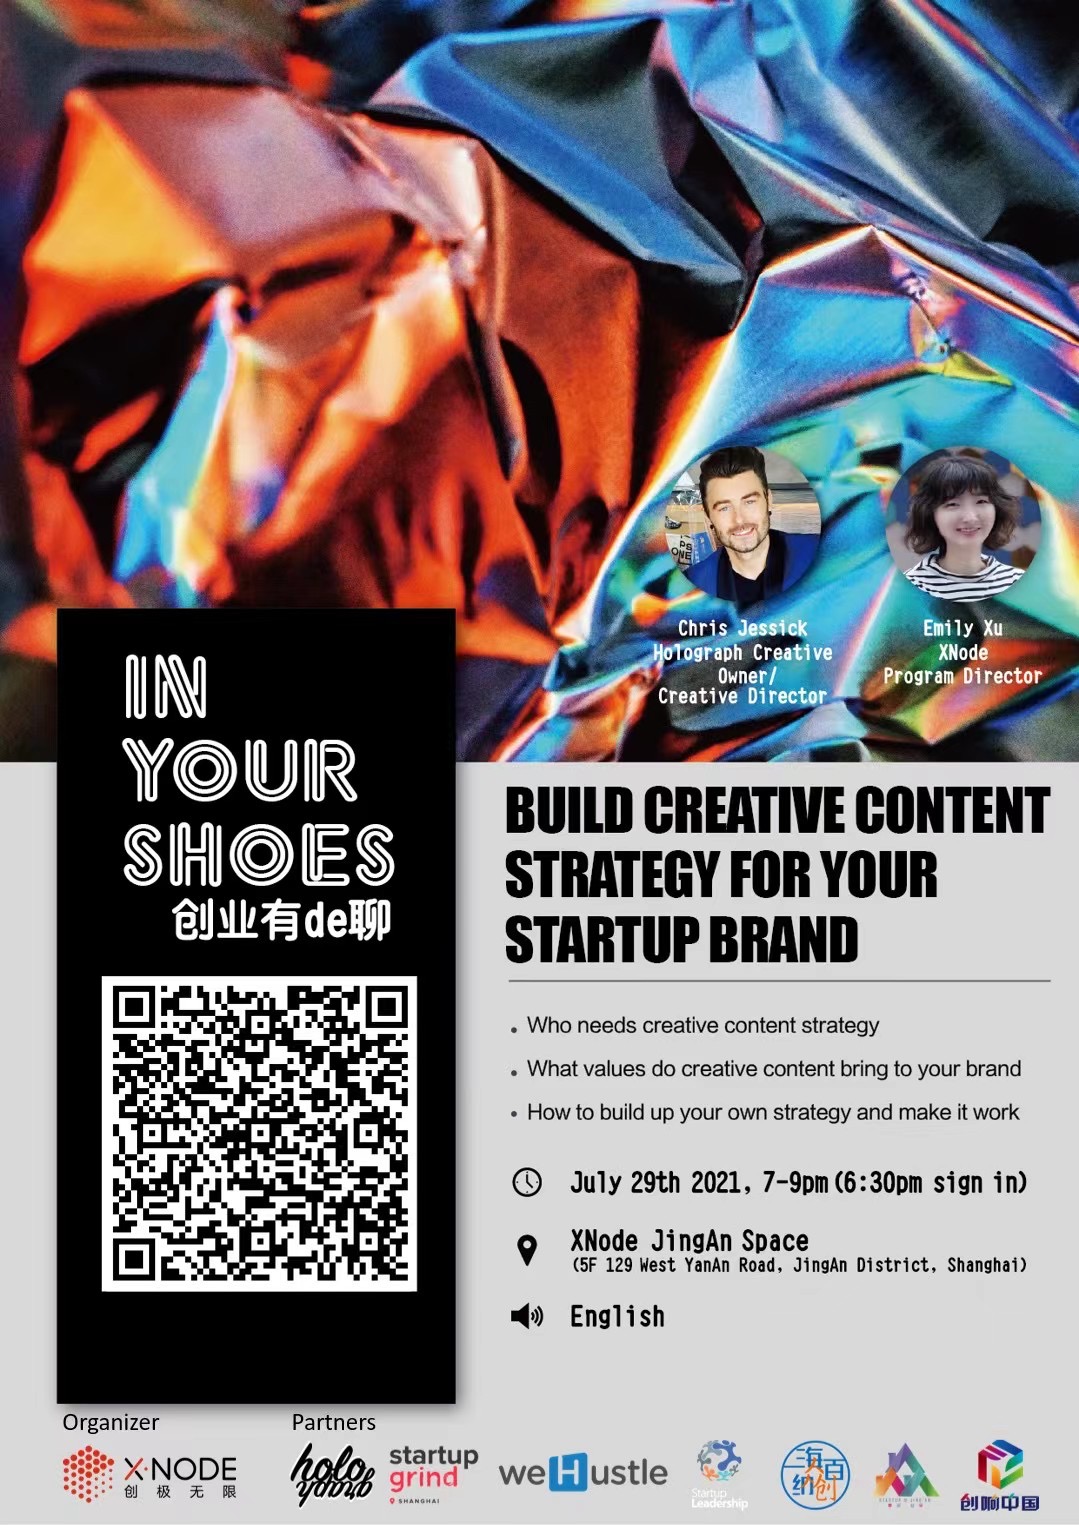 Build creative content strategy for your startup brand